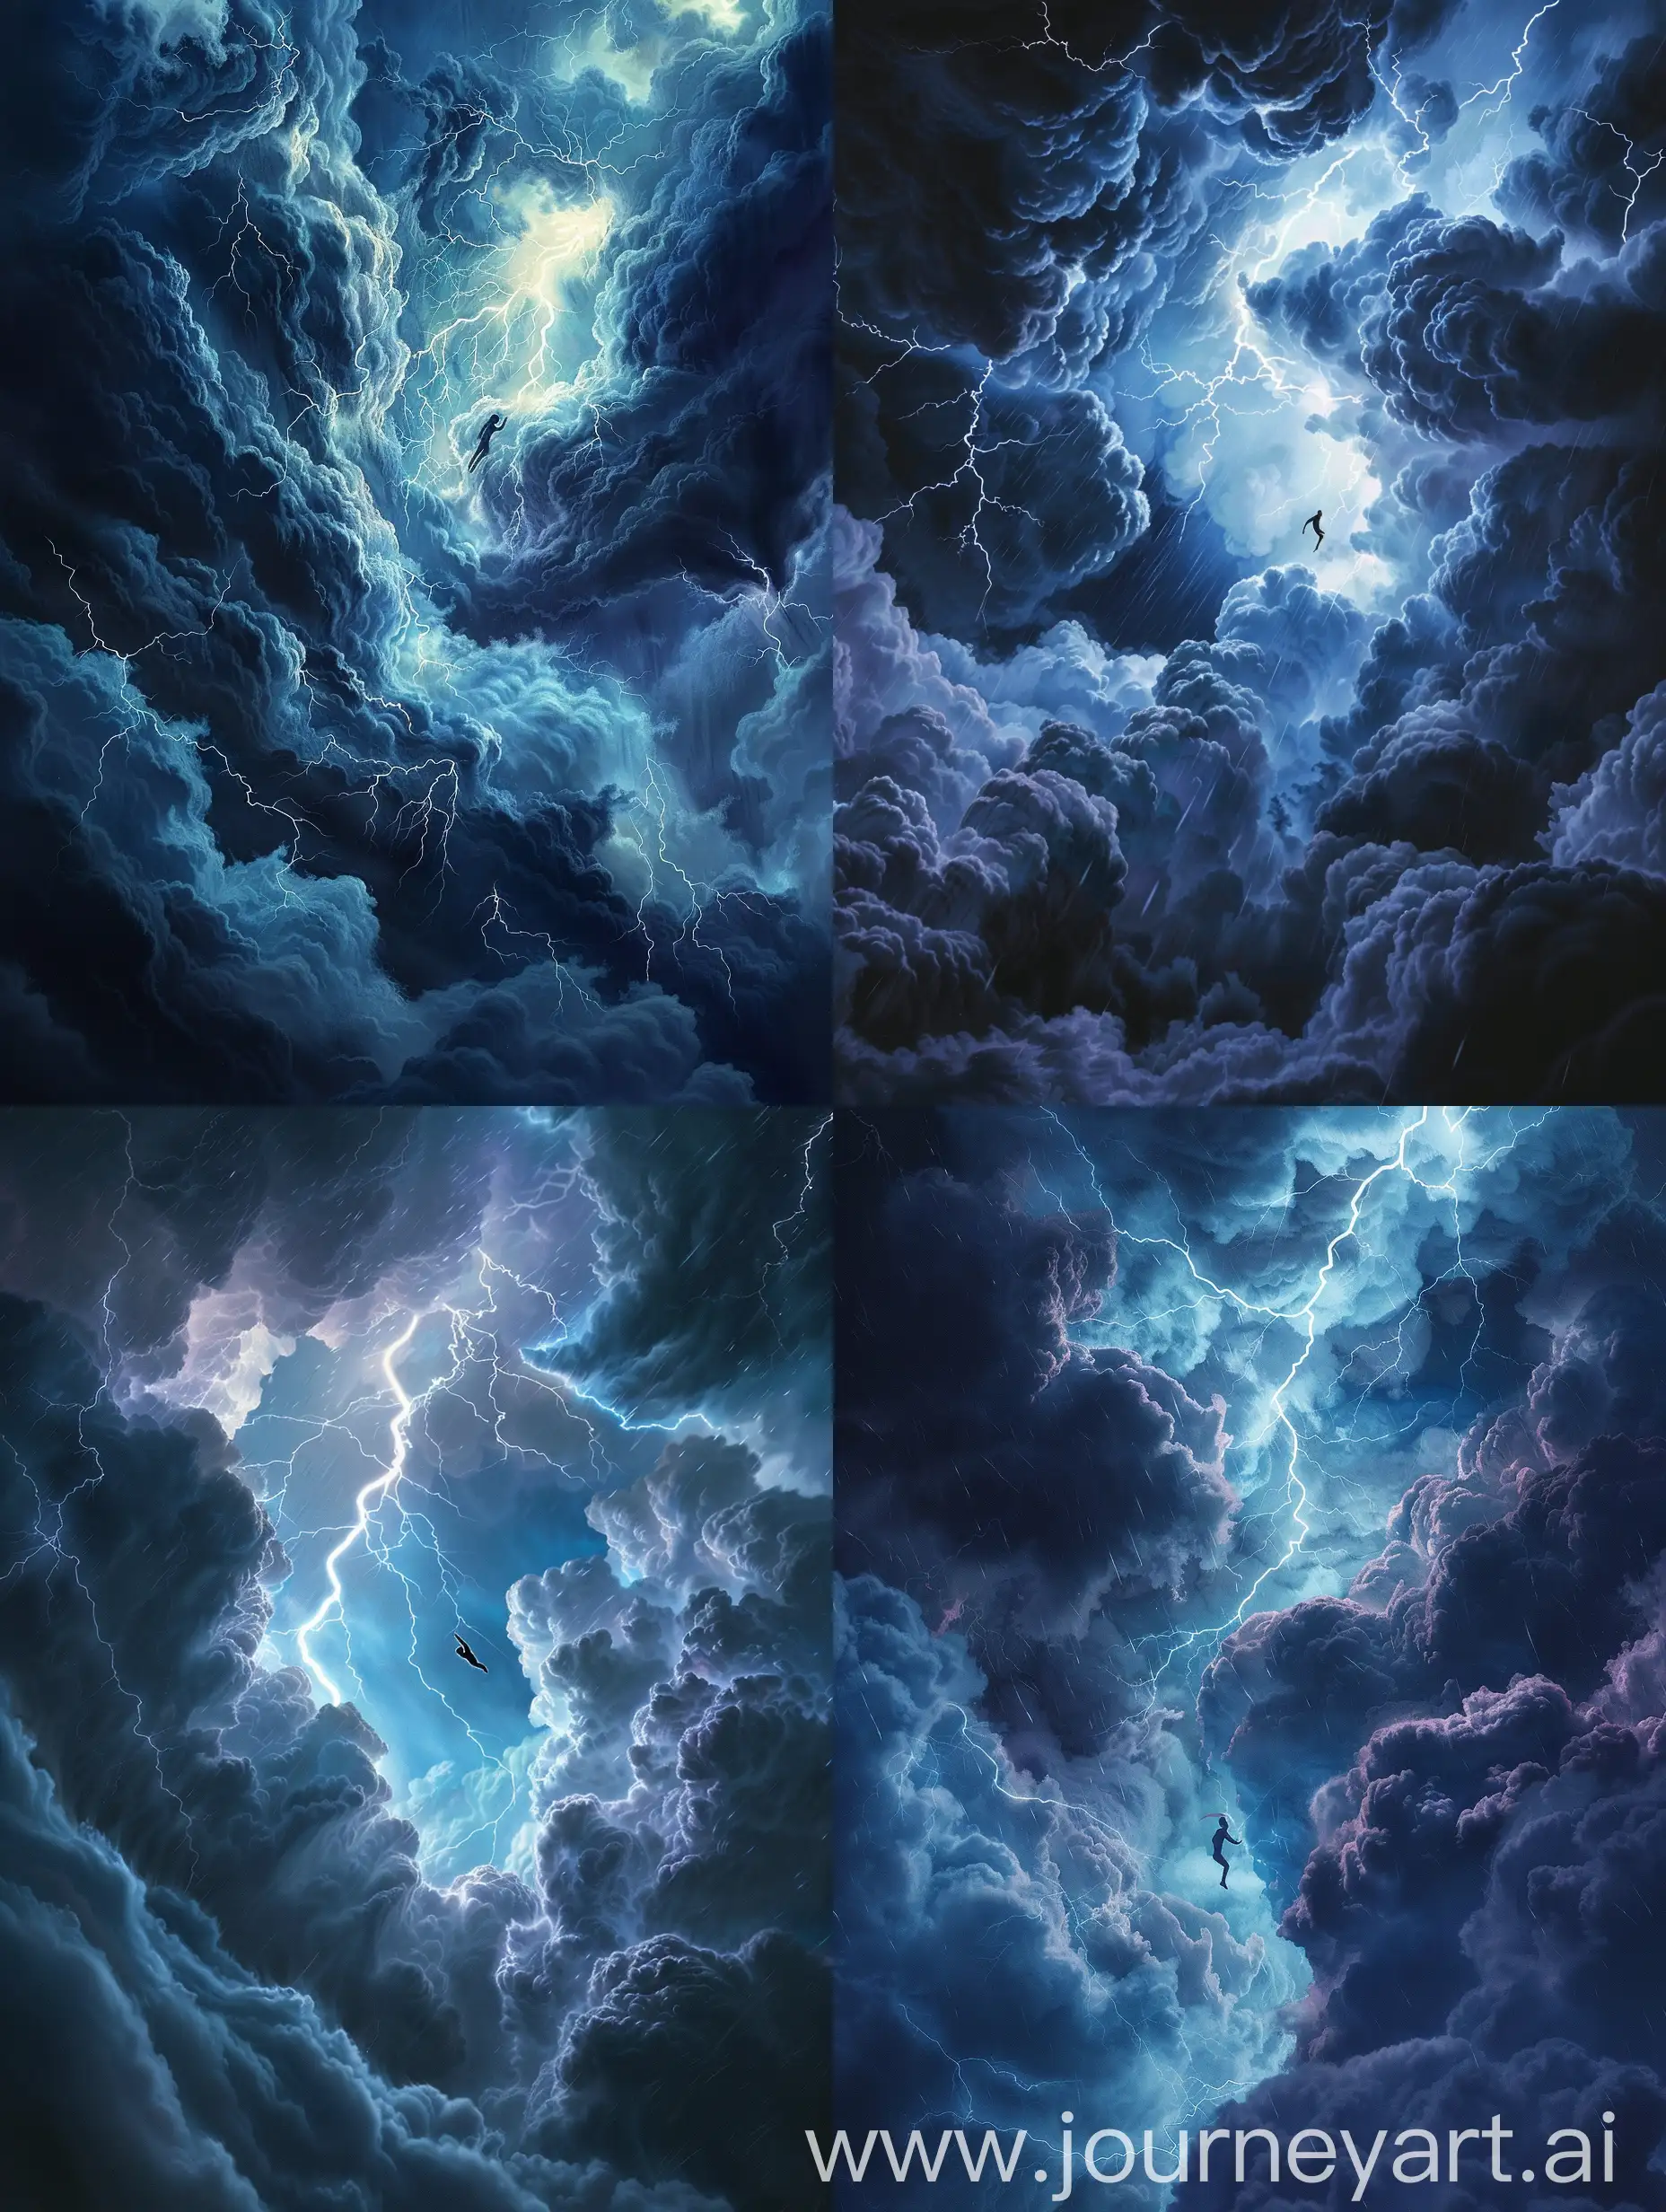  The scene unfolds against the backdrop of a foreboding and darkened sky, where billowing clouds of deep indigo and charcoal swirl ominously. The atmosphere is charged with an electric tension as bolts of lightning streak across the heavens, illuminating the turbulent clouds with brief, intense flashes. The air crackles with energy, and the thunderous echoes resonate through the darkness.  In the midst of this tempest, a solitary human silhouette emerges, rising skyward. The figure is defined by stark contrasts, standing out as a stark outline against the chaotic canvas of the stormy night. The person appears to be ascending, defying gravity and earthly constraints, as if propelled by an unseen force or a profound internal strength.  The silhouette is engulfed in the flickering brilliance of the lightning, casting dynamic shadows that dance upon the canvas of the dark sky. The contours of the human form are highlighted in fleeting moments, revealing a sense of determination and resilience in the face of the tumultuous surroundings.  The overall scene evokes a sense of both awe and trepidation, as the human figure defies the darkness and ascends towards the unknown. The juxtaposition of the fragile yet determined silhouette against the chaotic backdrop of the storm creates a powerful and mysterious narrative, leaving the viewer to ponder the significance of this ascent in the face of adversity.